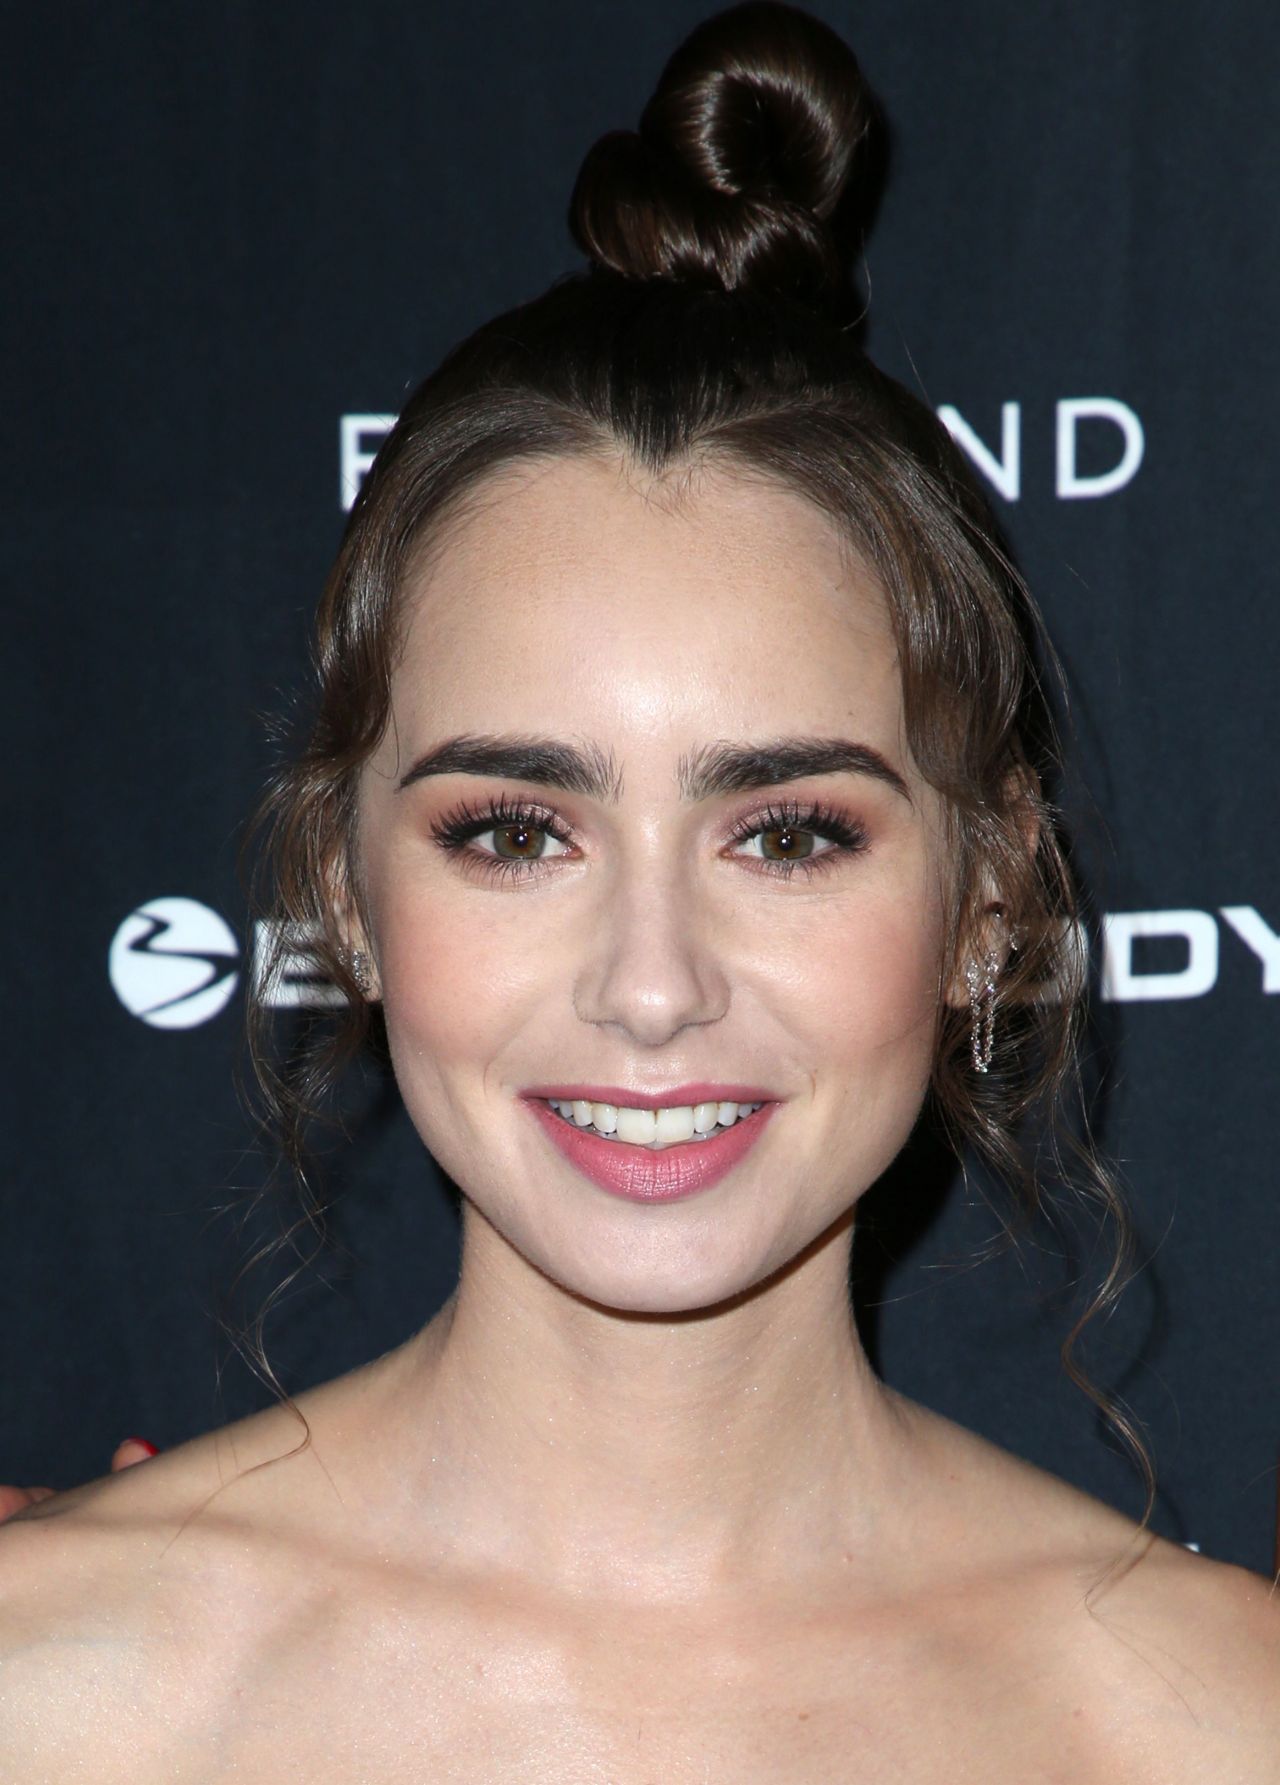 lily-collins-go-campaign-gala-in-los-angeles-10-20-2018-2.jpg